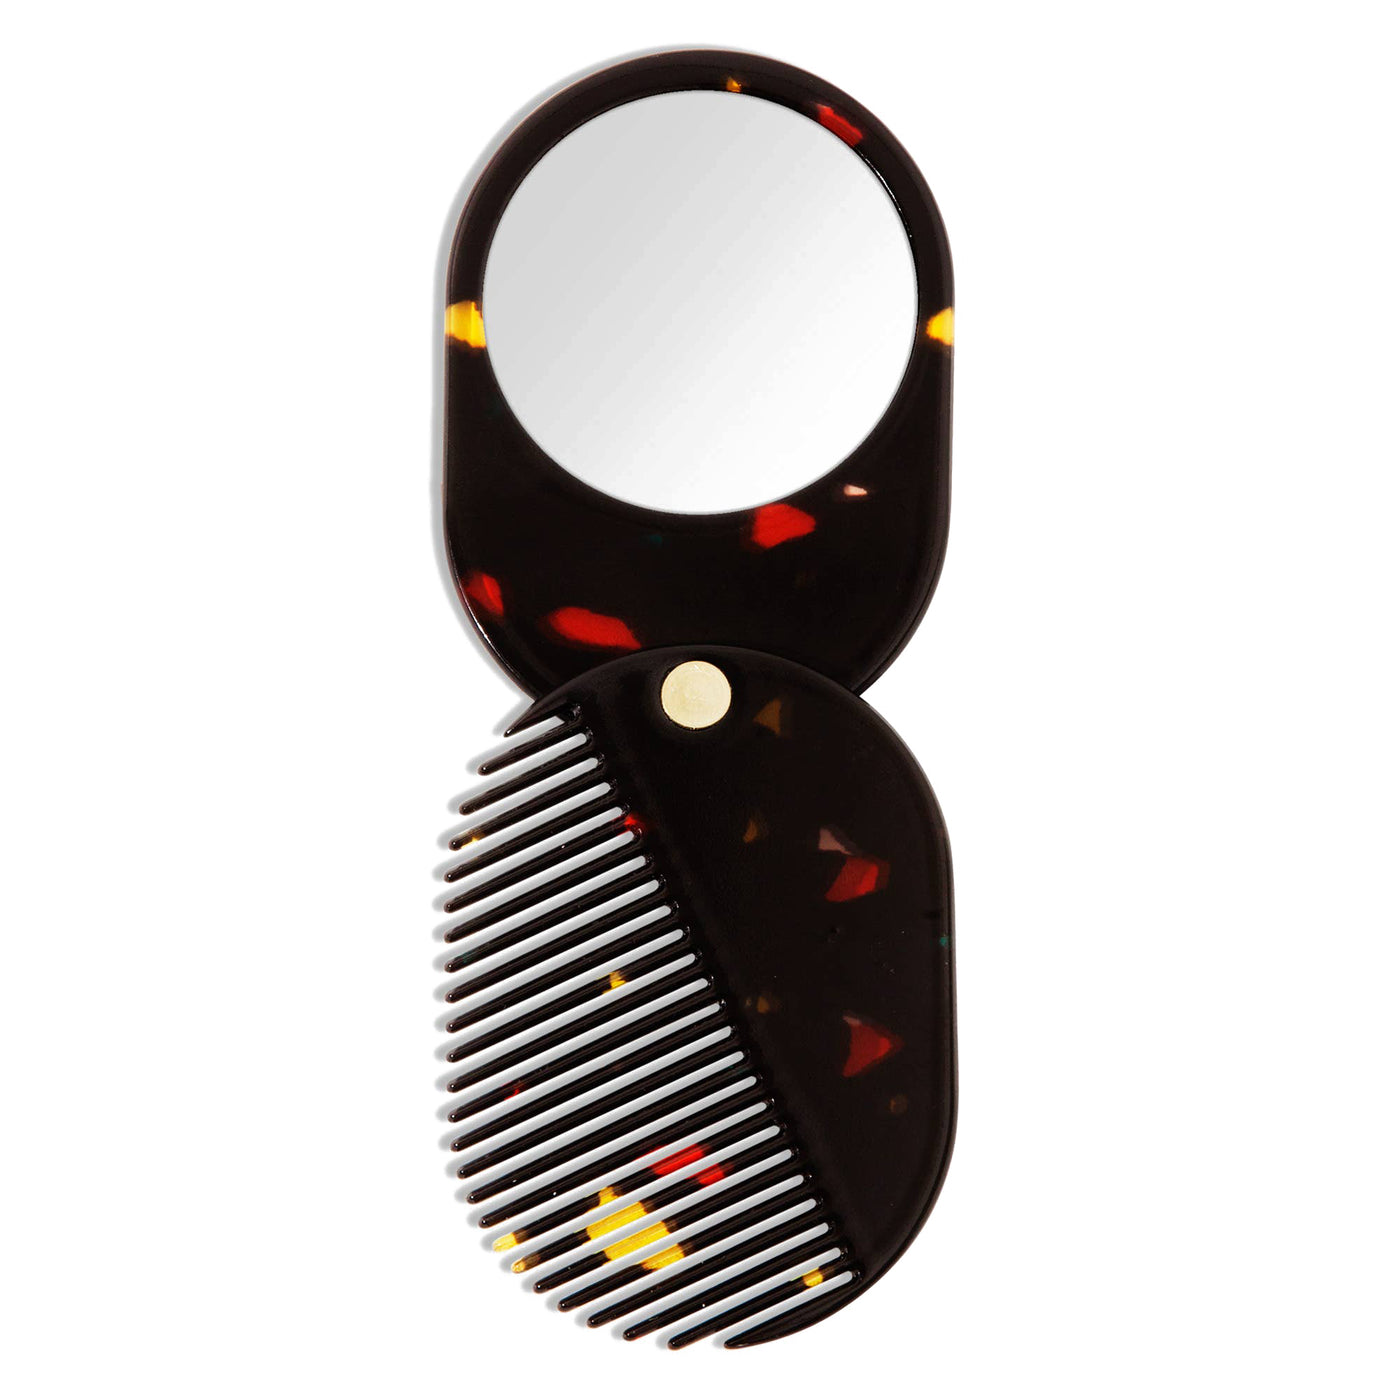 2 in 1 Pocket Comb + Mirror in Black Amber